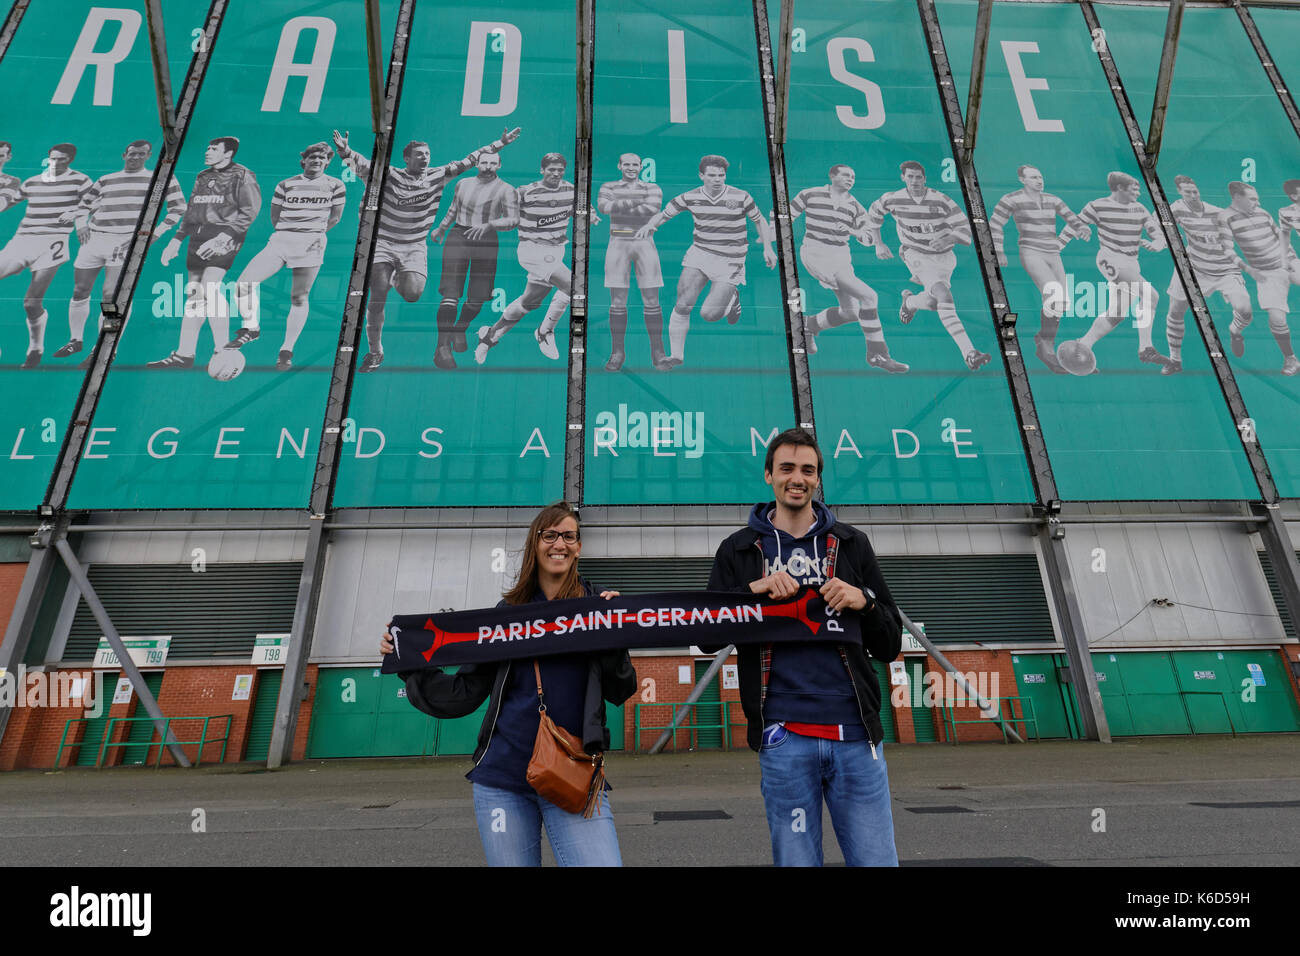 Glasgow, Scotland, UK. 12th Sept, 2017. Paris Saint-Germain Football Club, commonly known as PSG play Glasgow Celtic in the Champions league tonight. PSG fans arrive to pick up their tickets at lunchtime . Credit: gerard ferry/Alamy Live News Stock Photo